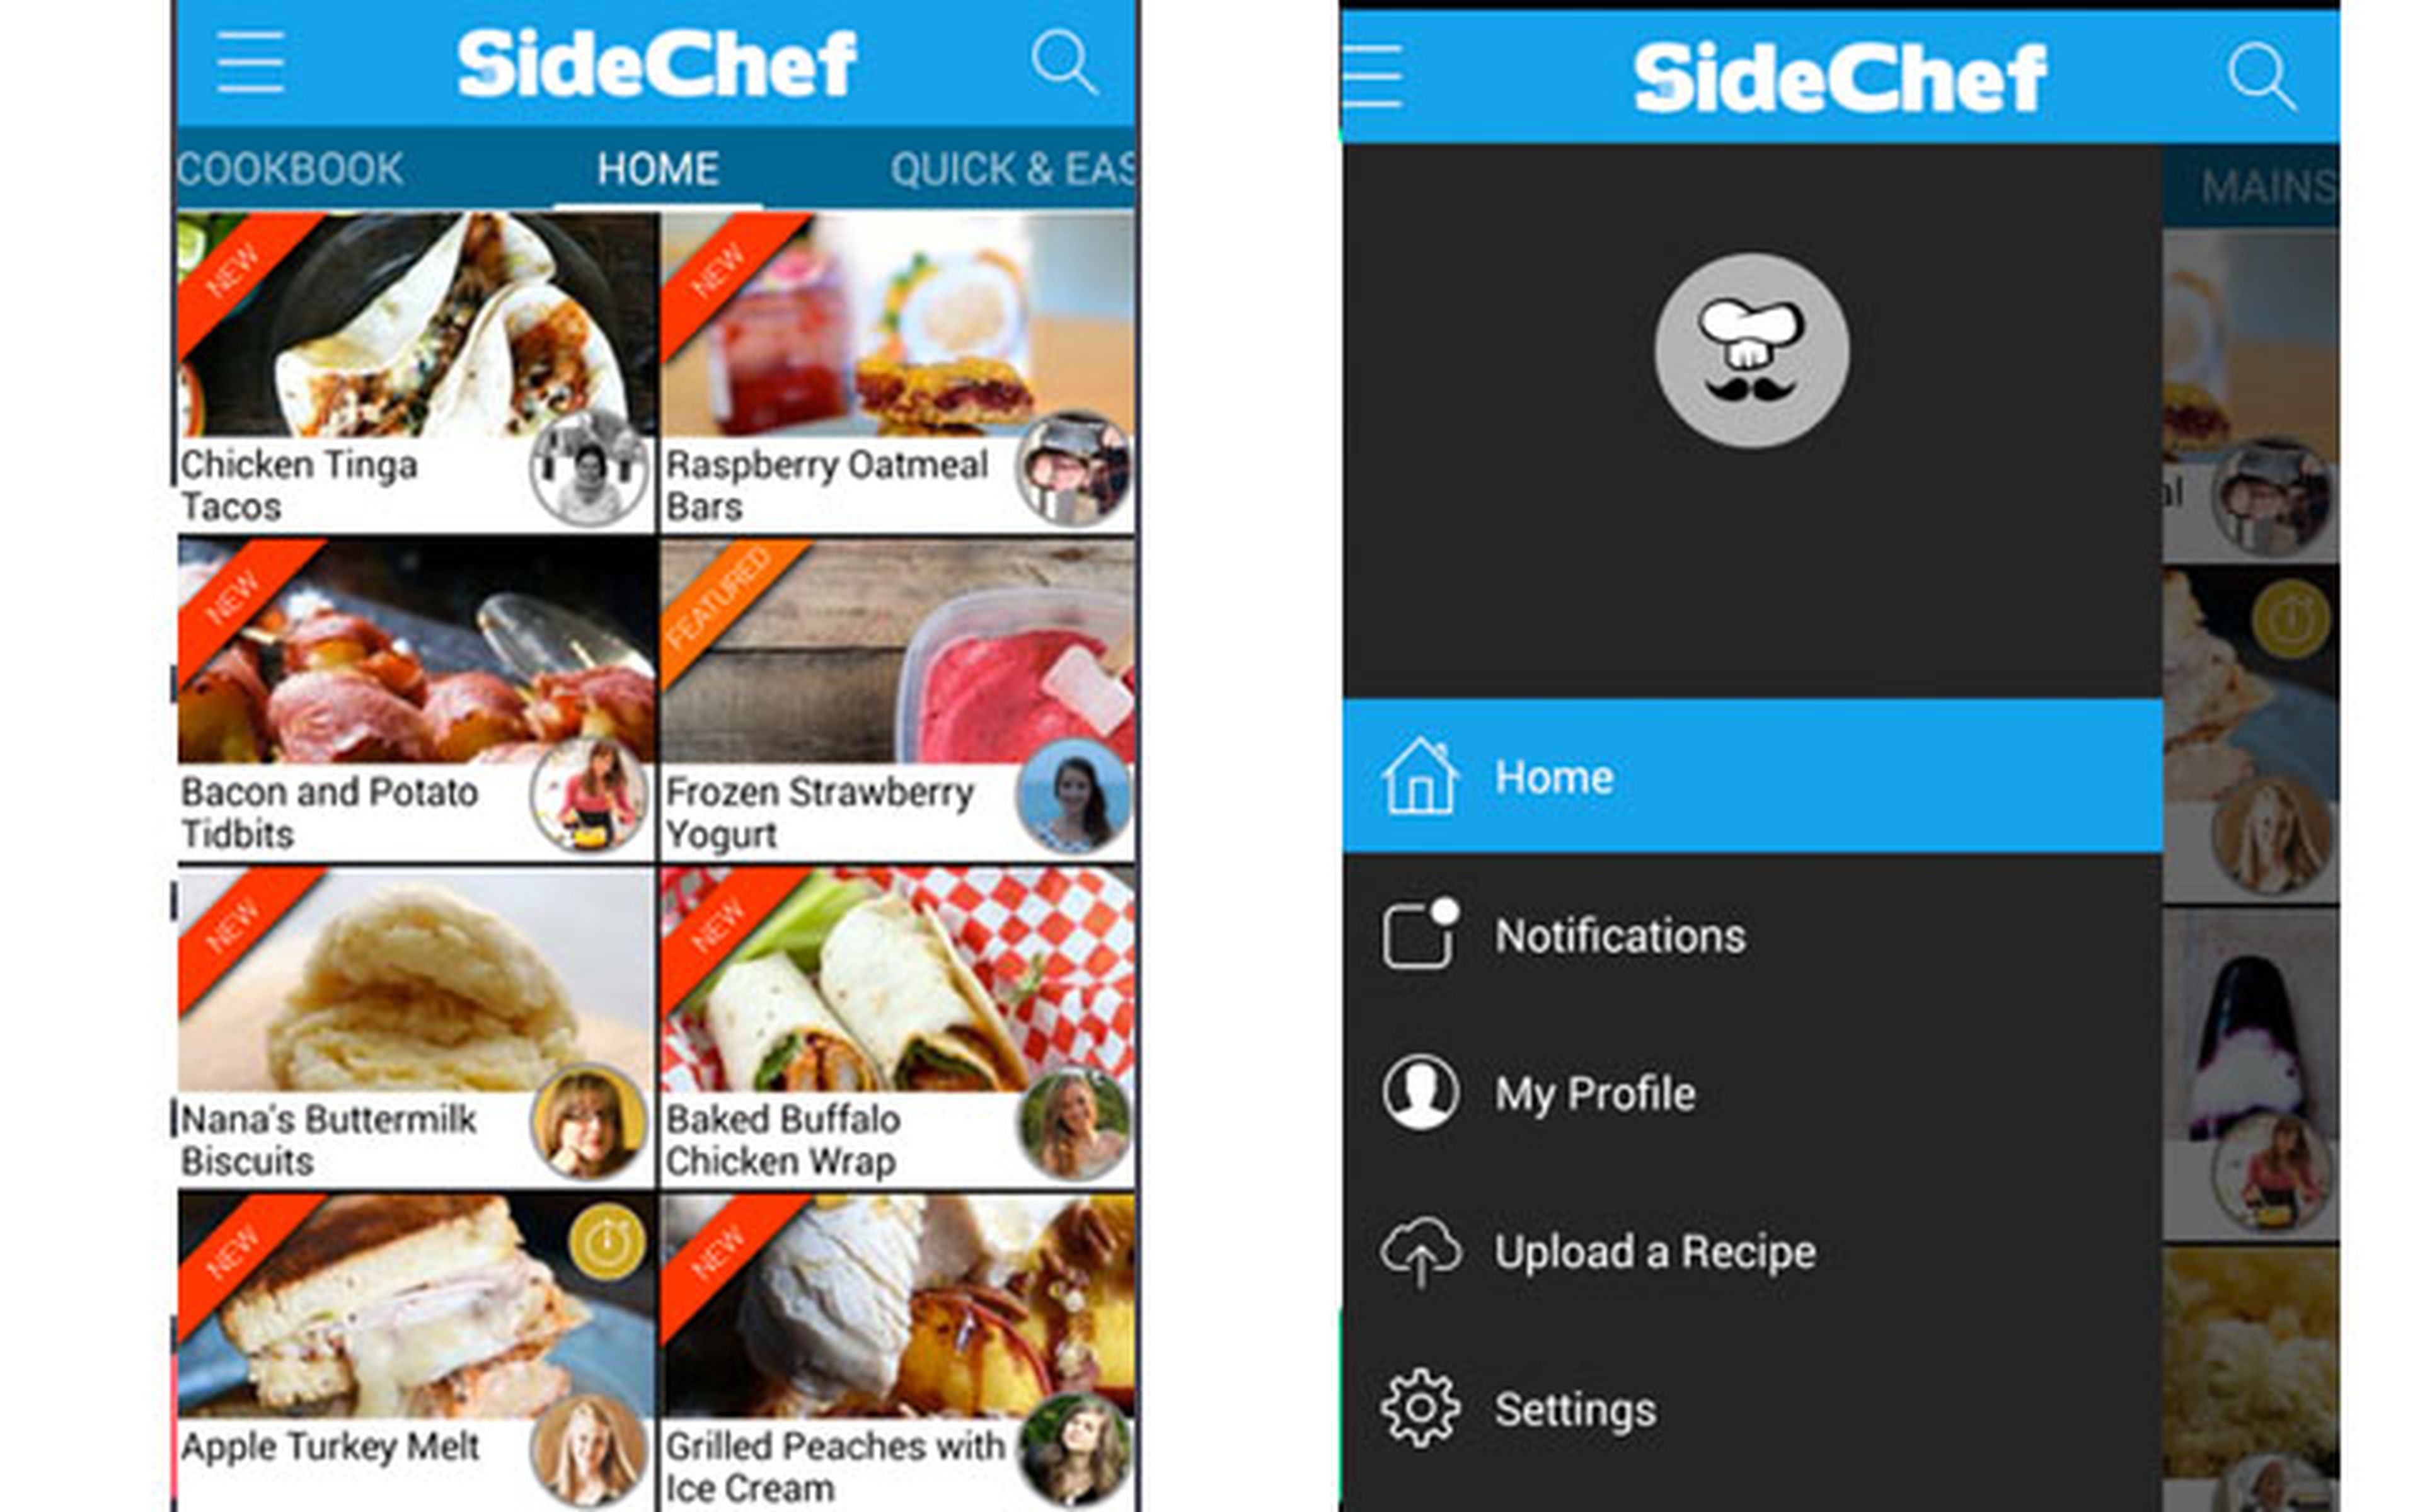 SideChef: Step-by-step cooking